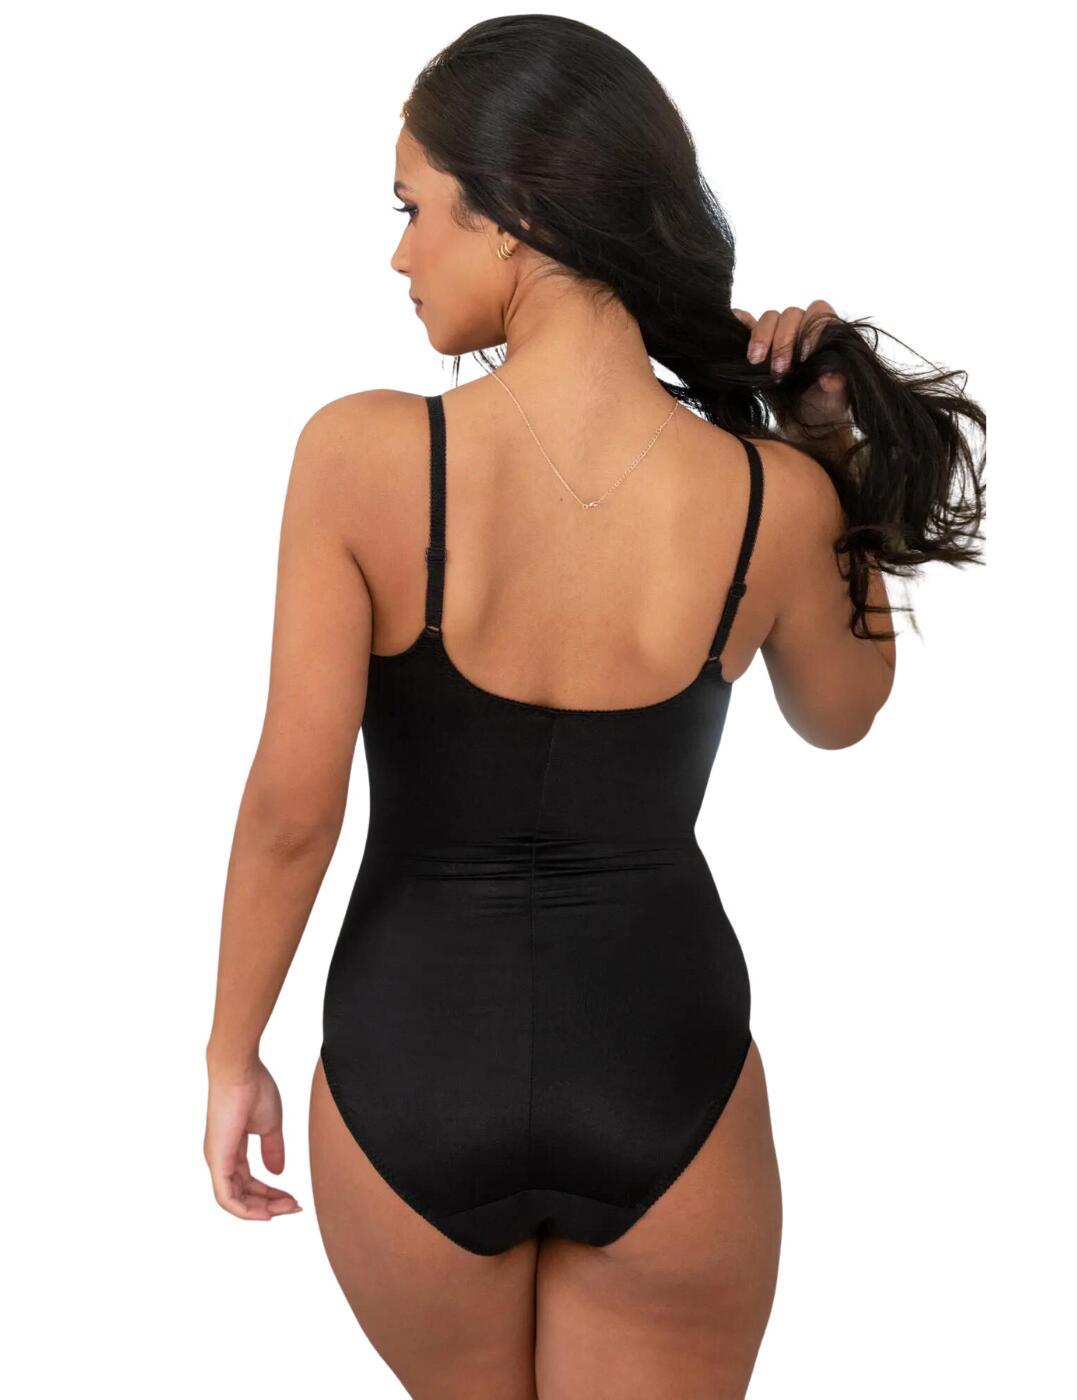 CHARNOS WHITE BODY Shaper Corset 34FF Style 171 Superfit £15.00